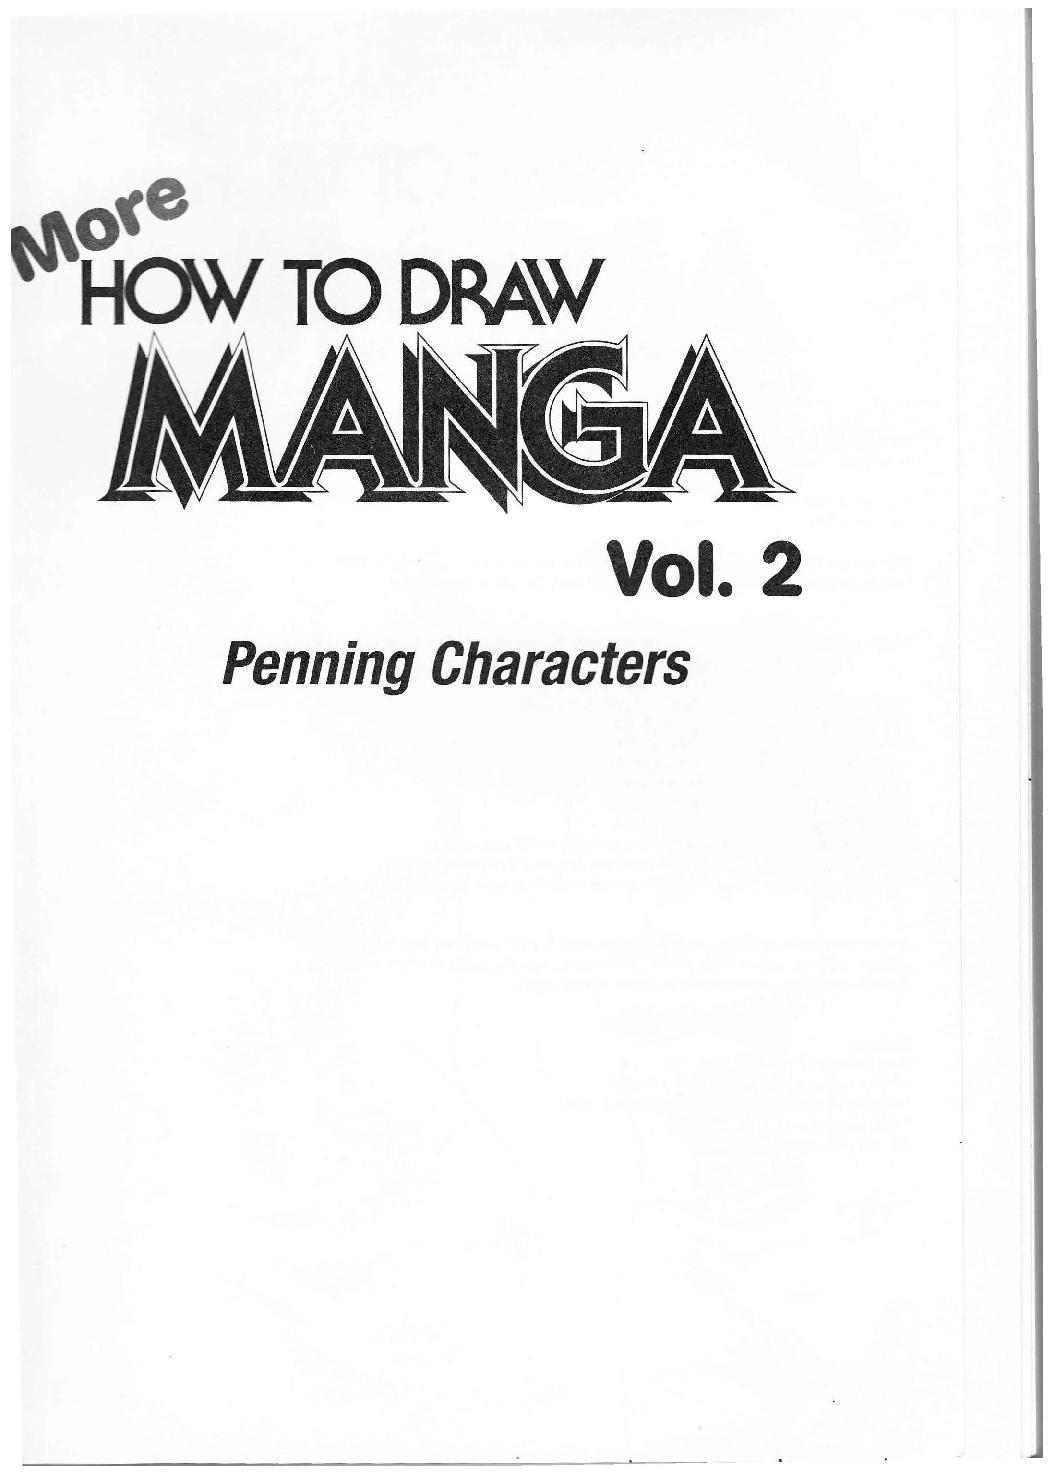 More How to Draw Manga Vol. 2 - Penning Characters 2